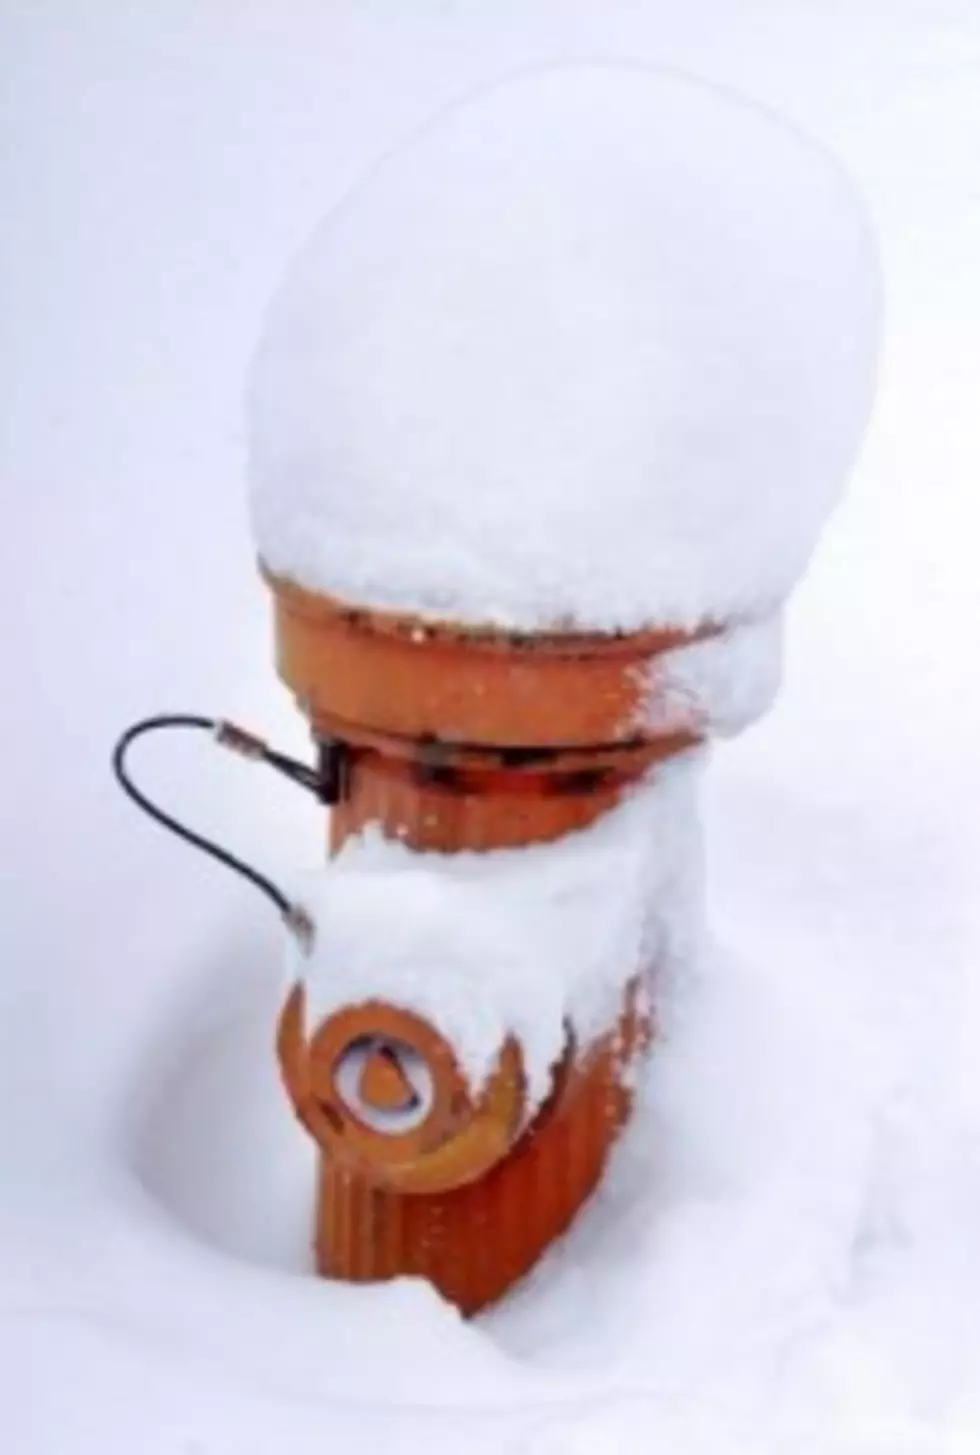 Fire Officials Asking Homeowners to Clear Snow Covered Fire Hydrants